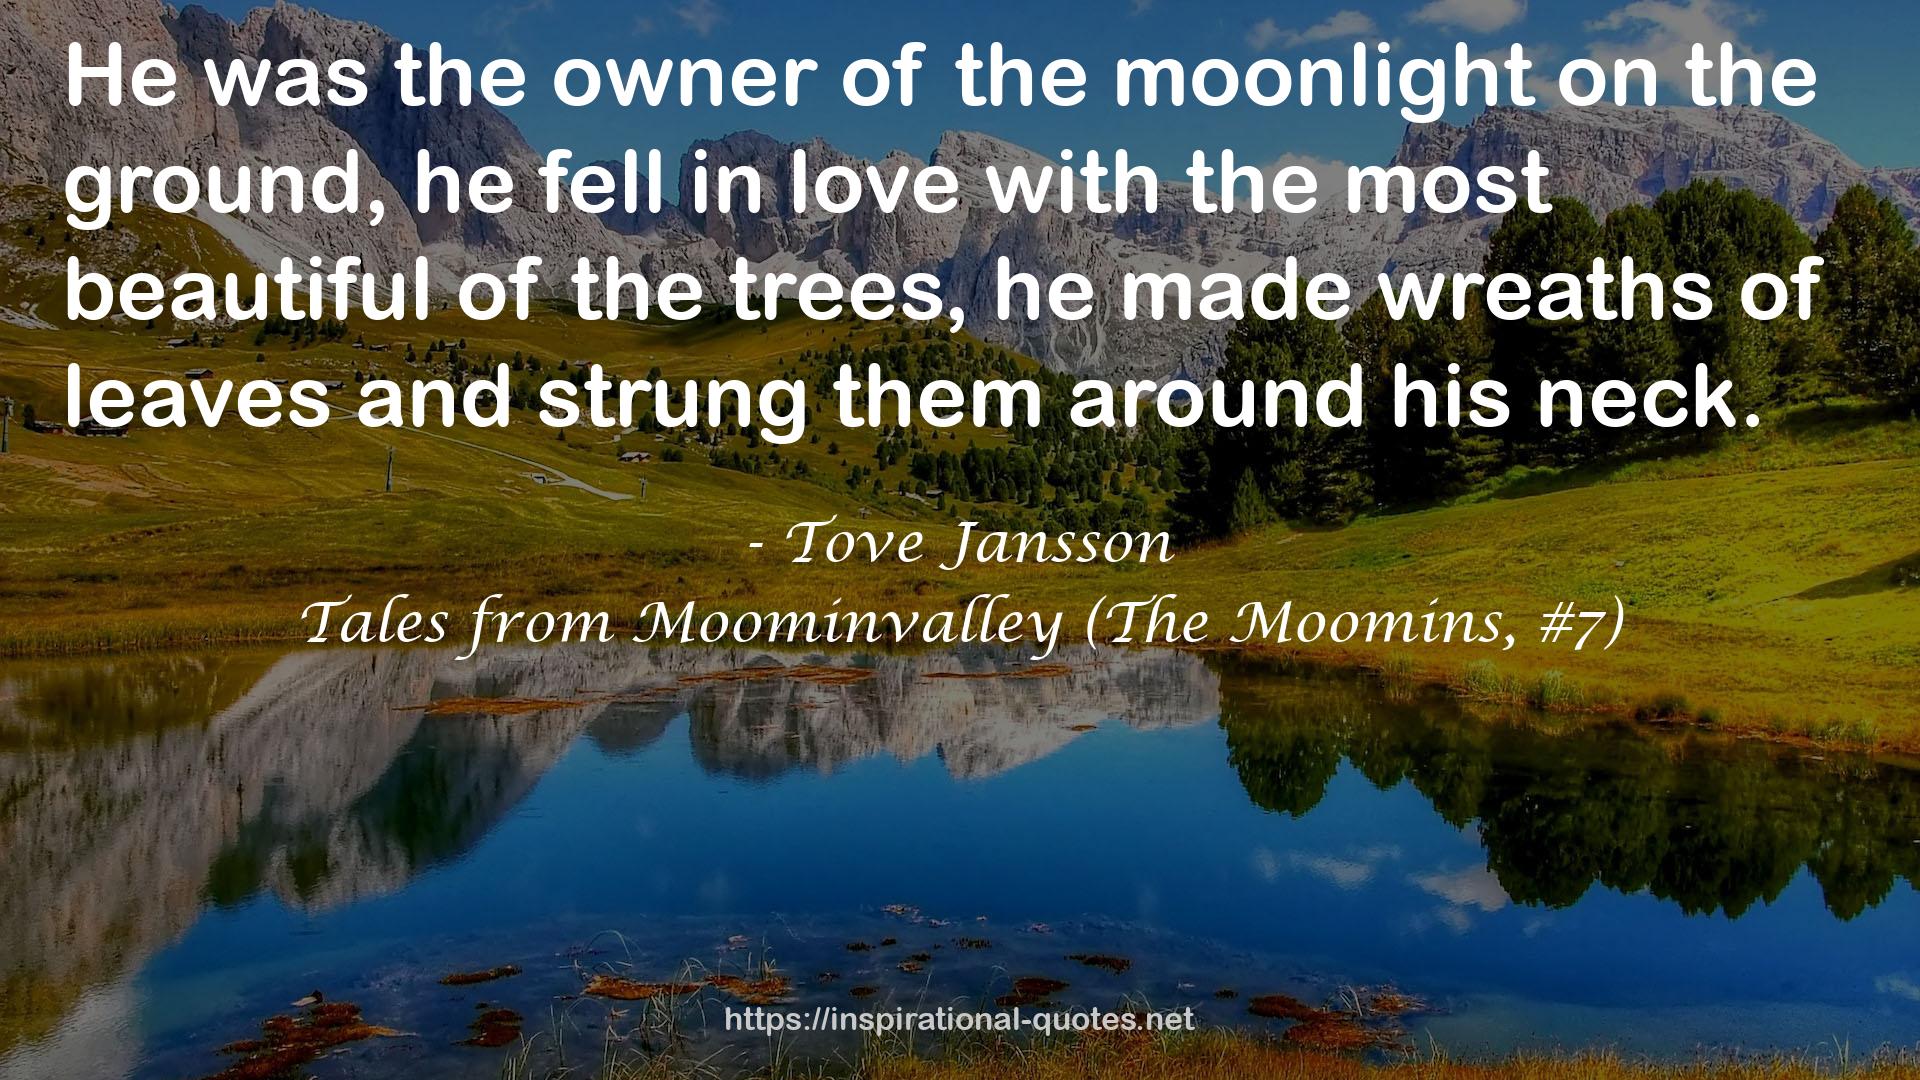 Tales from Moominvalley (The Moomins, #7) QUOTES